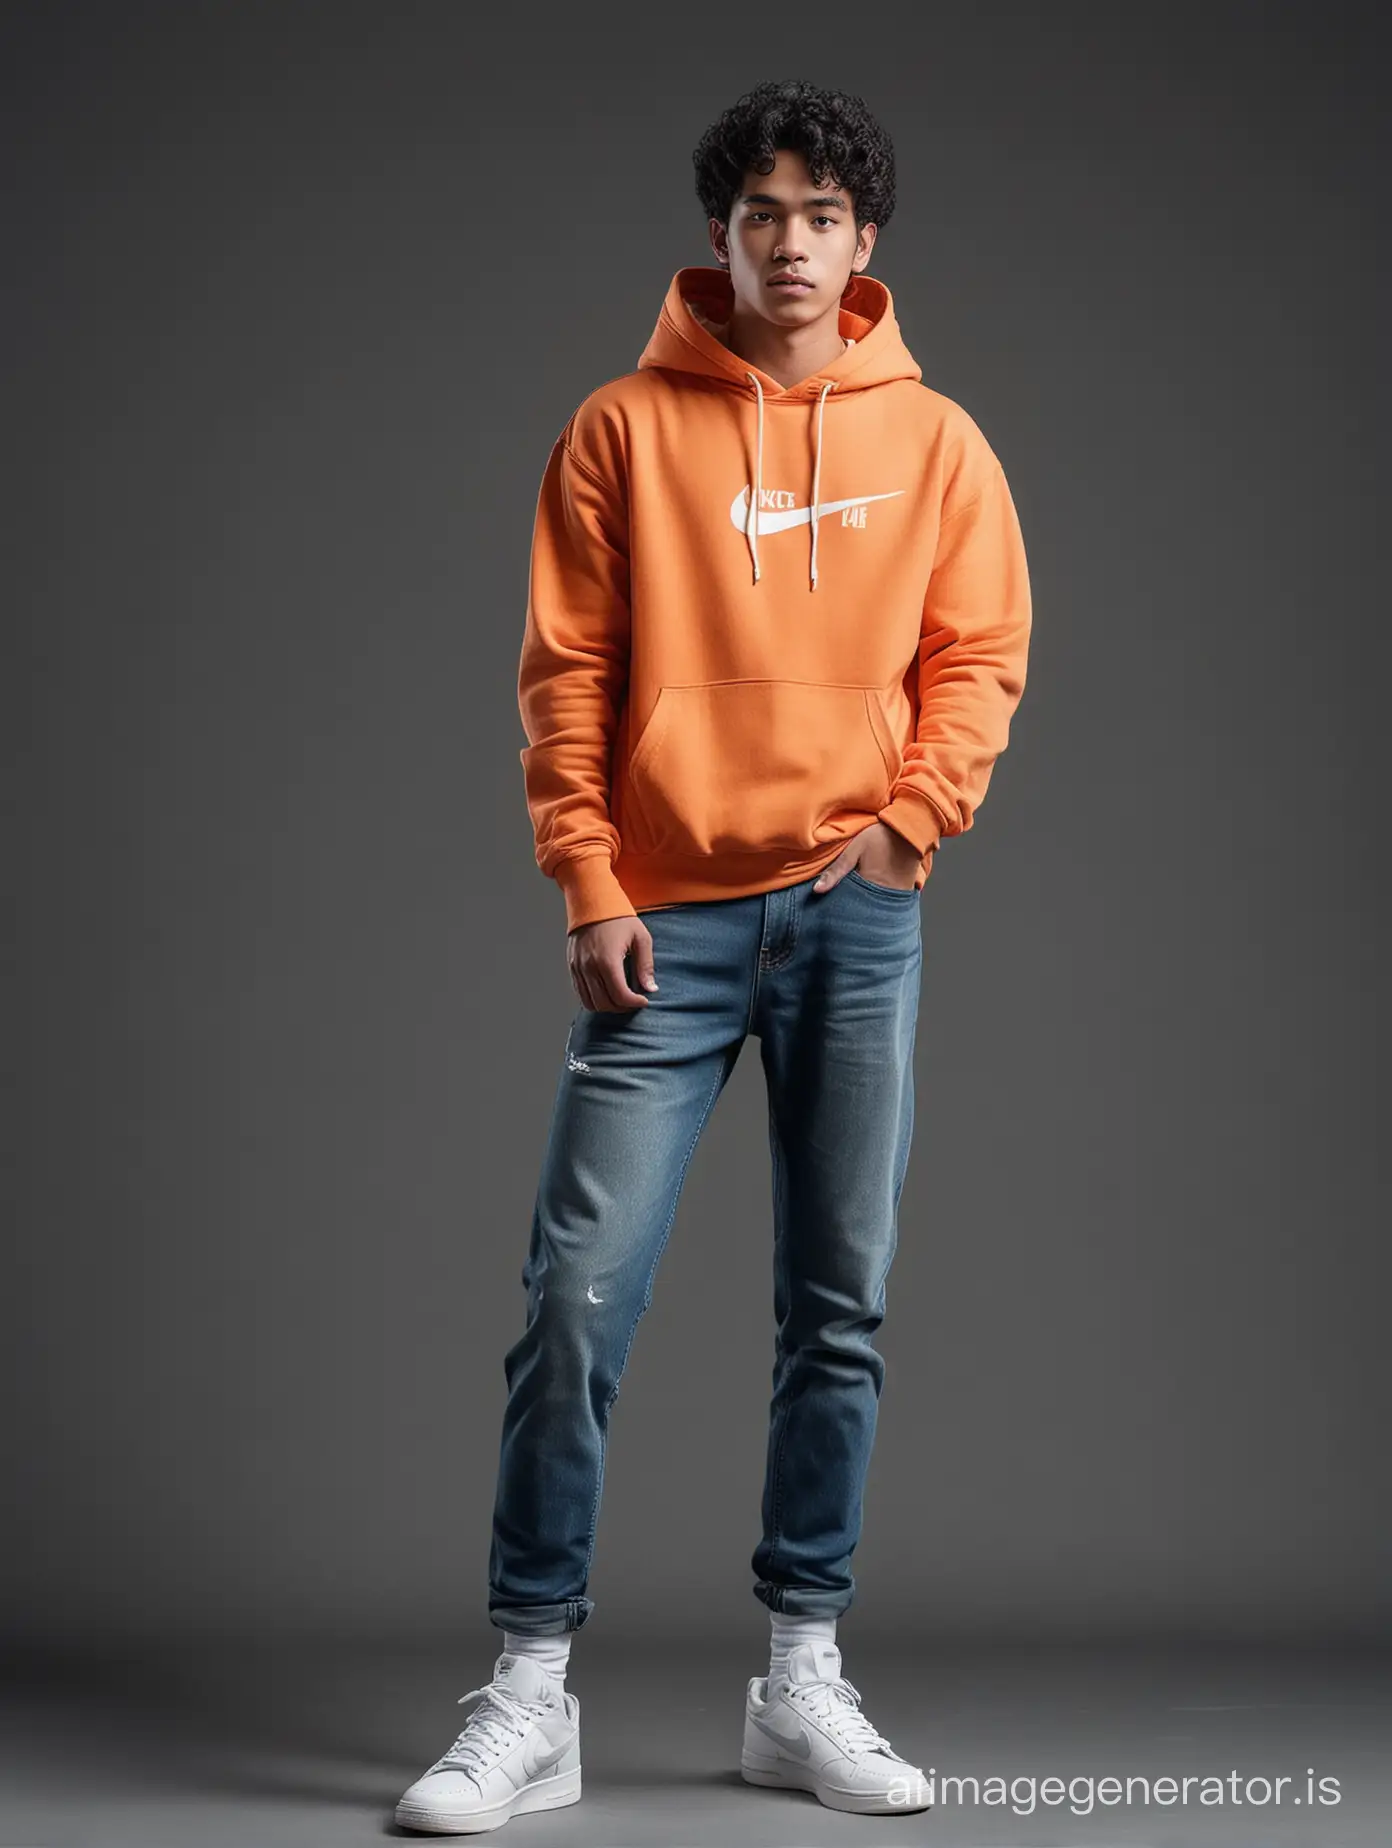 Stylish-Indonesian-Man-in-Orange-Hoodie-and-Nike-Sneakers-on-Charcoal-Blue-Background